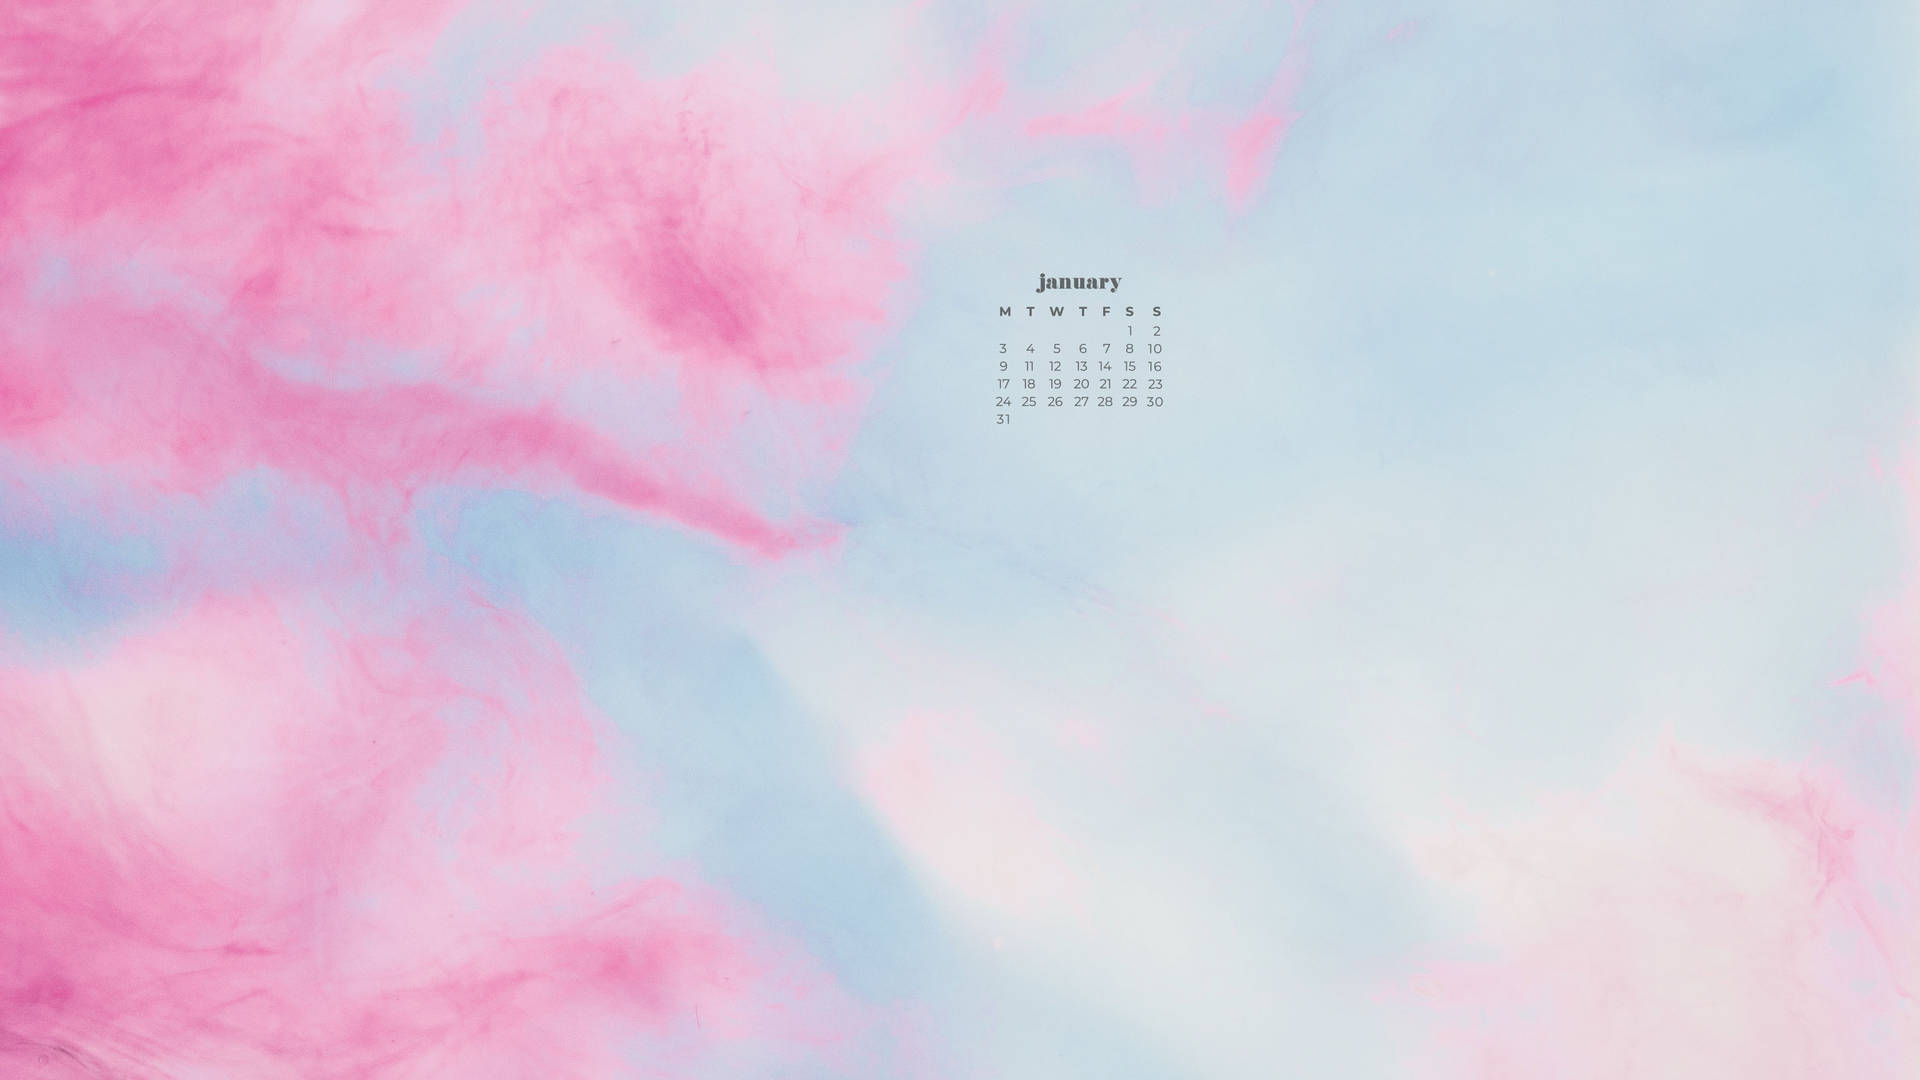 Abstract Pink Smoke January 2022 Calendar Picture